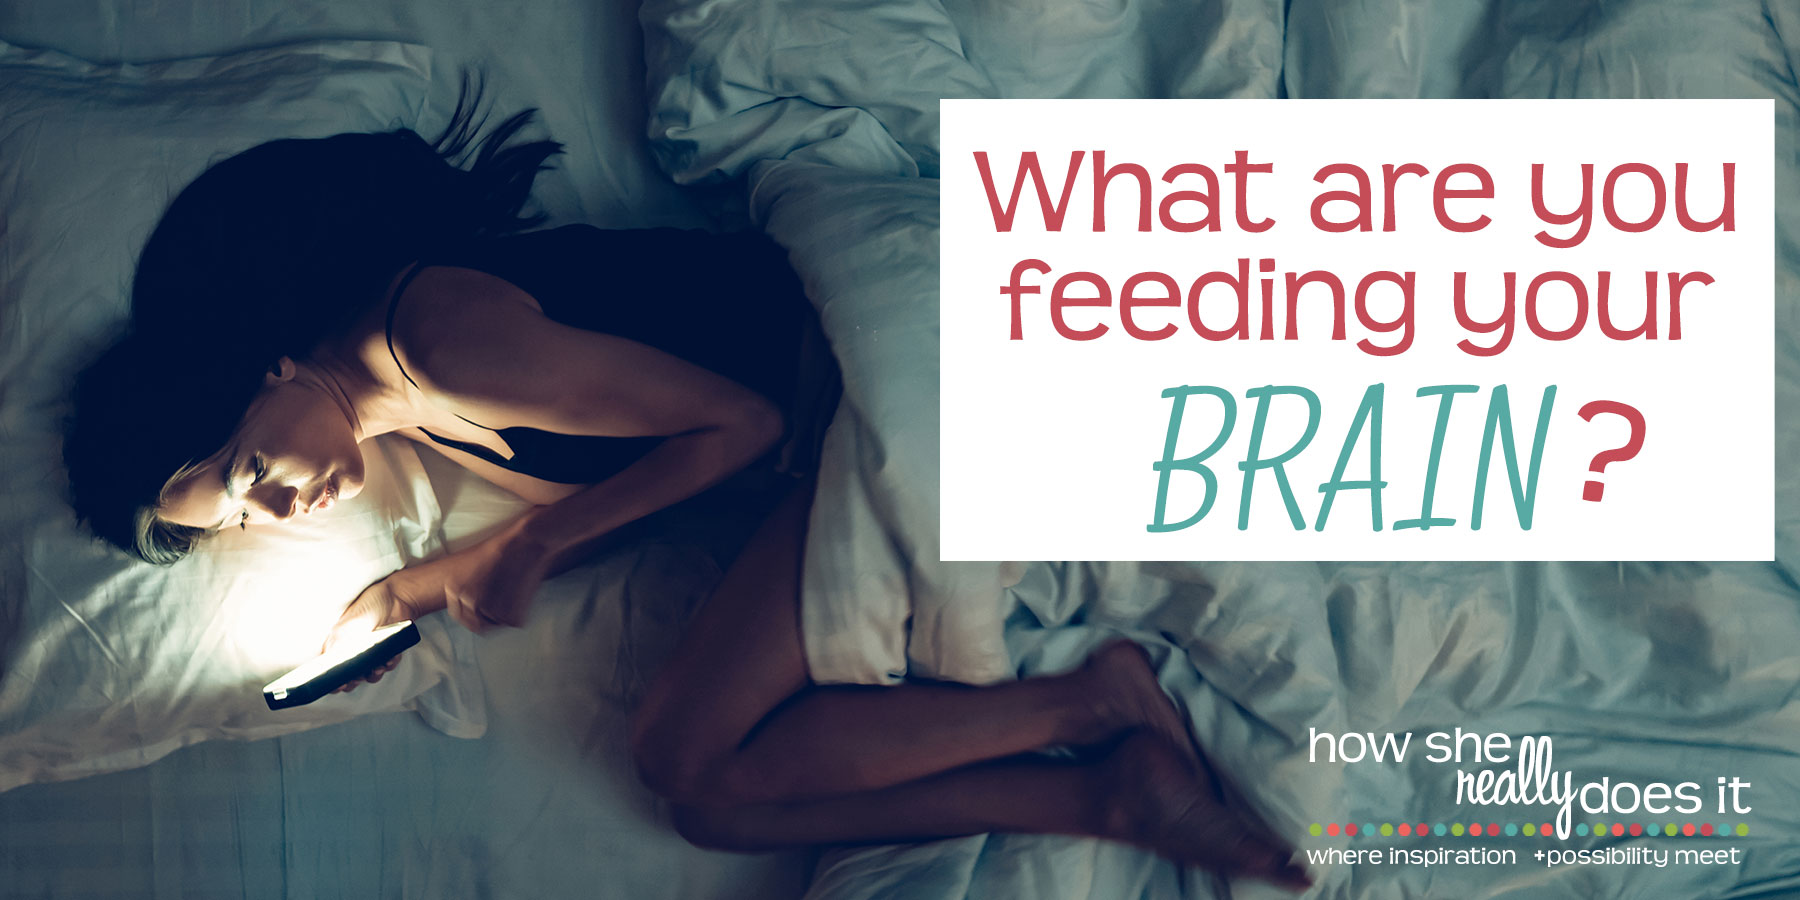 What are you feeding your brain?